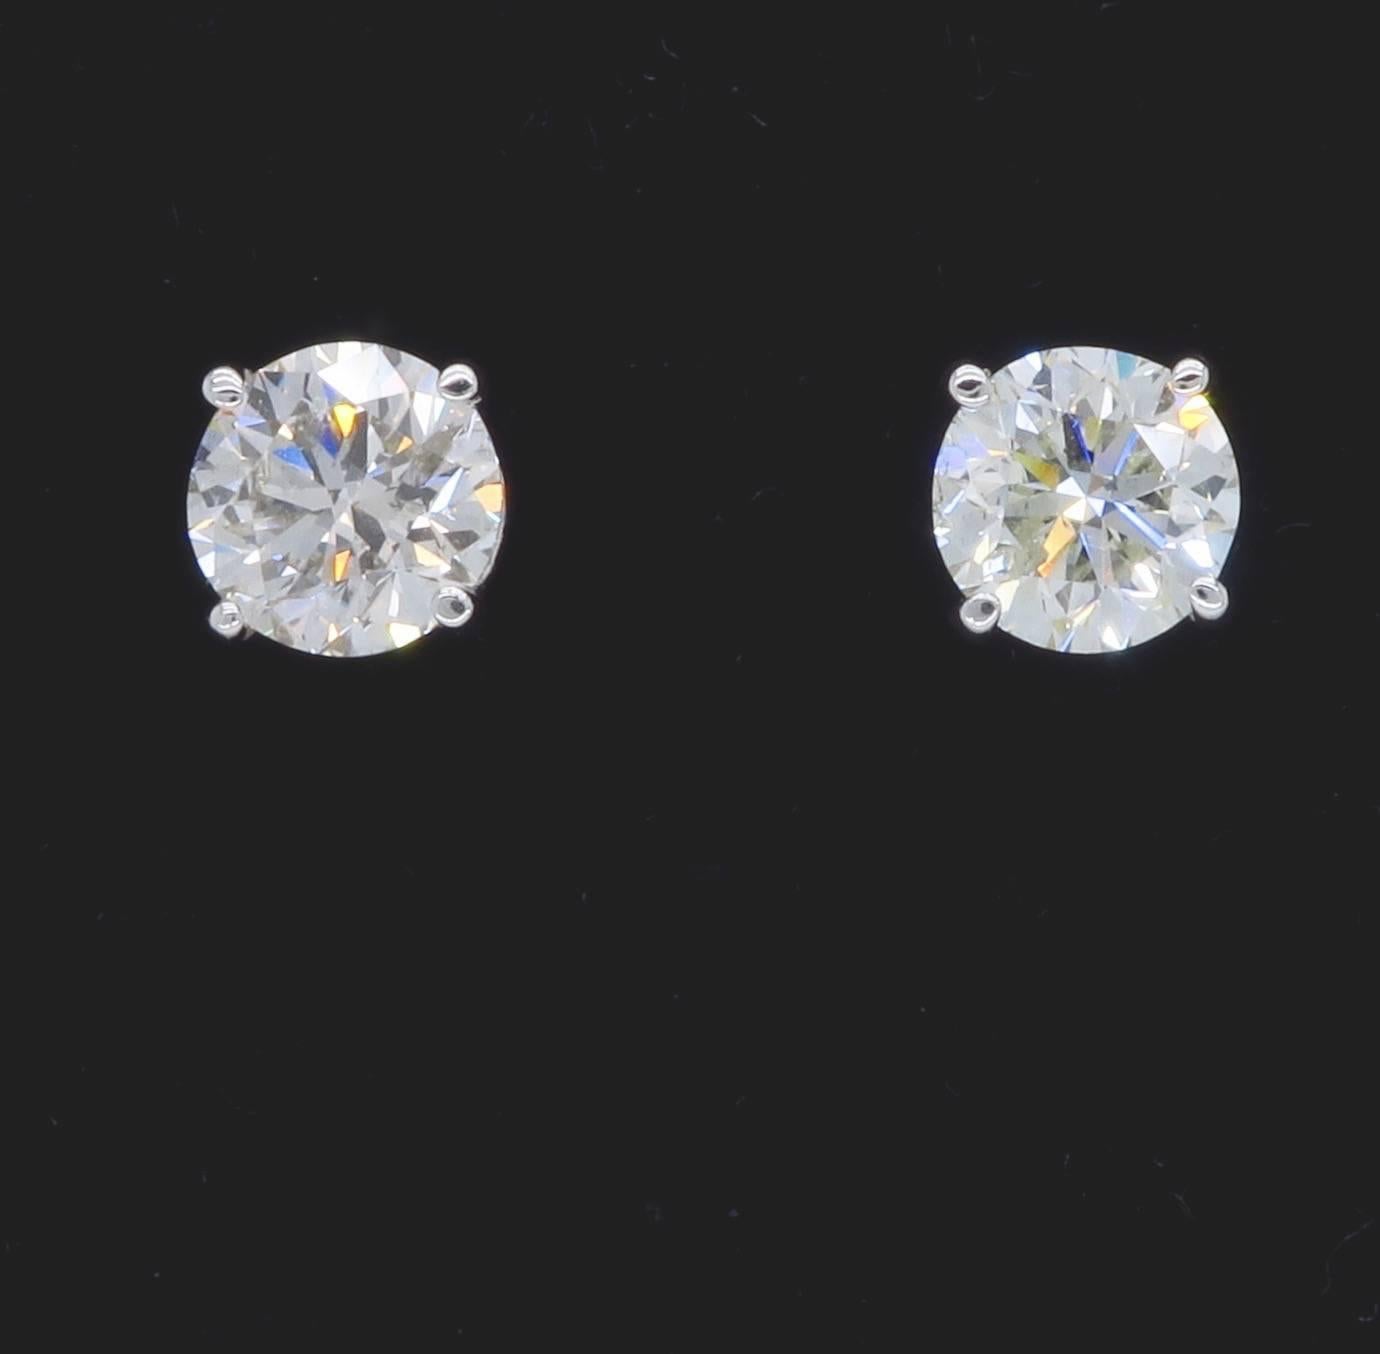 Pair of Round Brilliant Cut Diamond studs is set in a classic 4 prong setting with convenient protector safety backs.  Each earring has an approximately .90CT Round Brilliant Cut Diamond. The diamonds display J-K color and I1 clarity, there are two